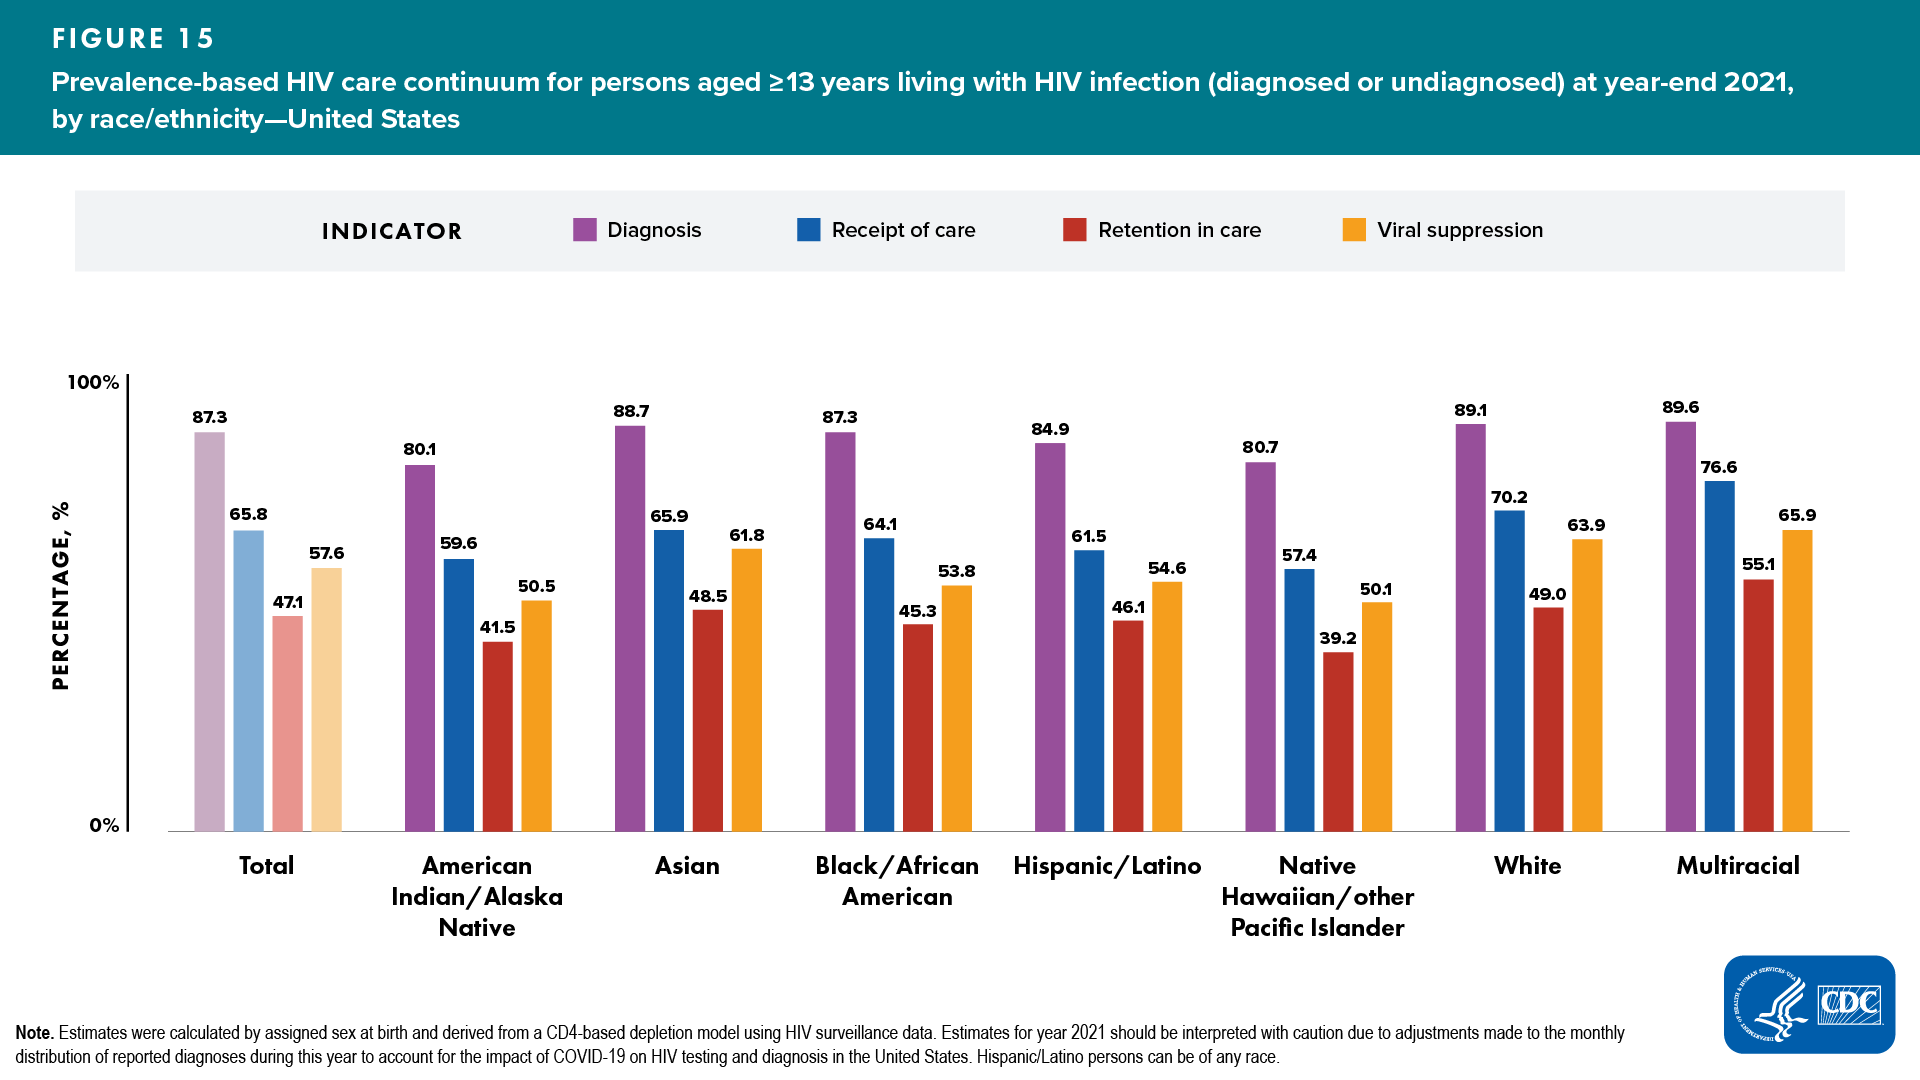 Figure 15. Prevalence-based HIV care continuum for persons aged ≥13 years living with HIV infection (diagnosed or undiagnosed) at year-end 2021, by race/ethnicity—United States